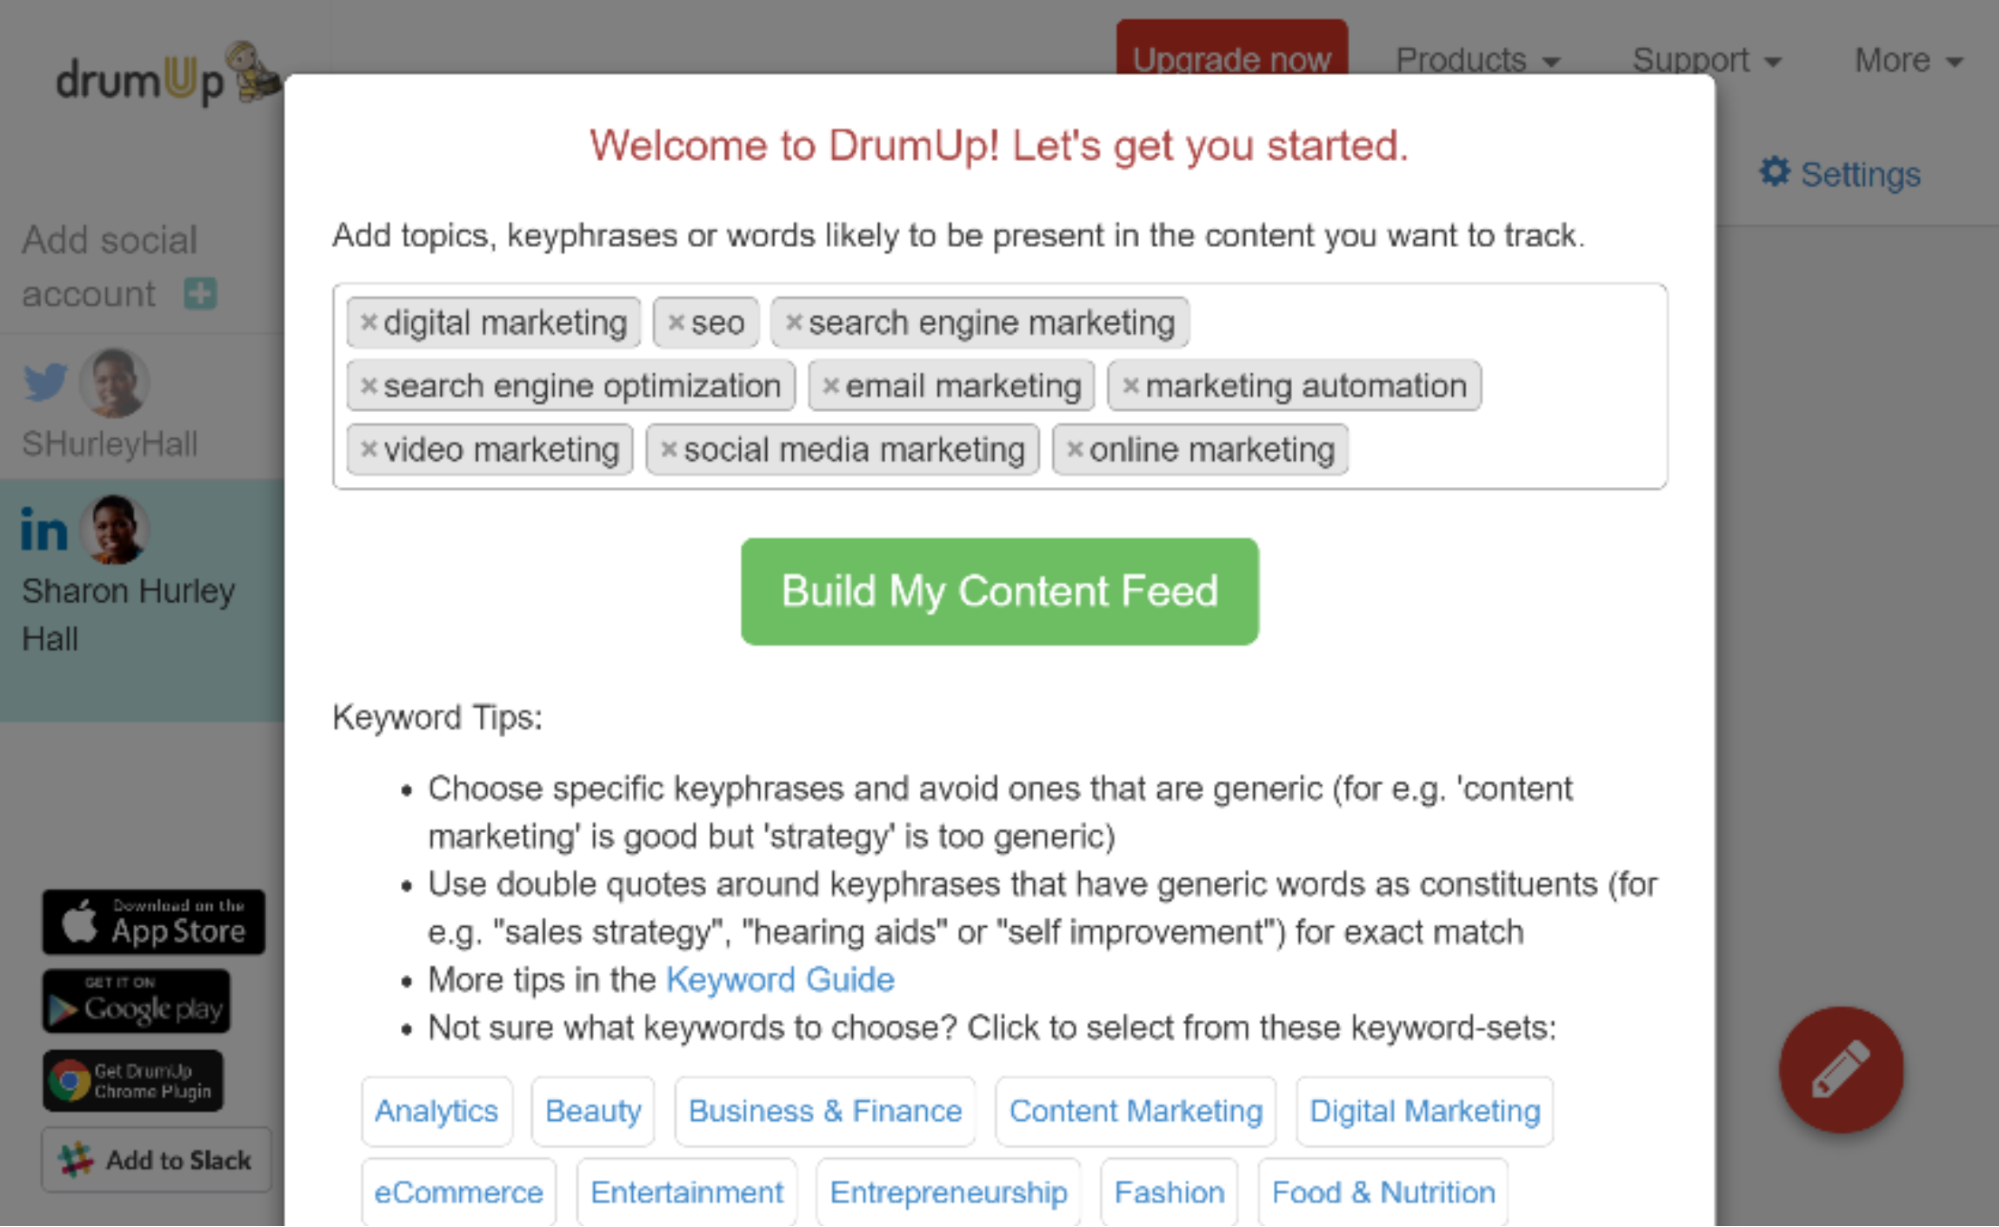 Build my content feed page on DrumUp